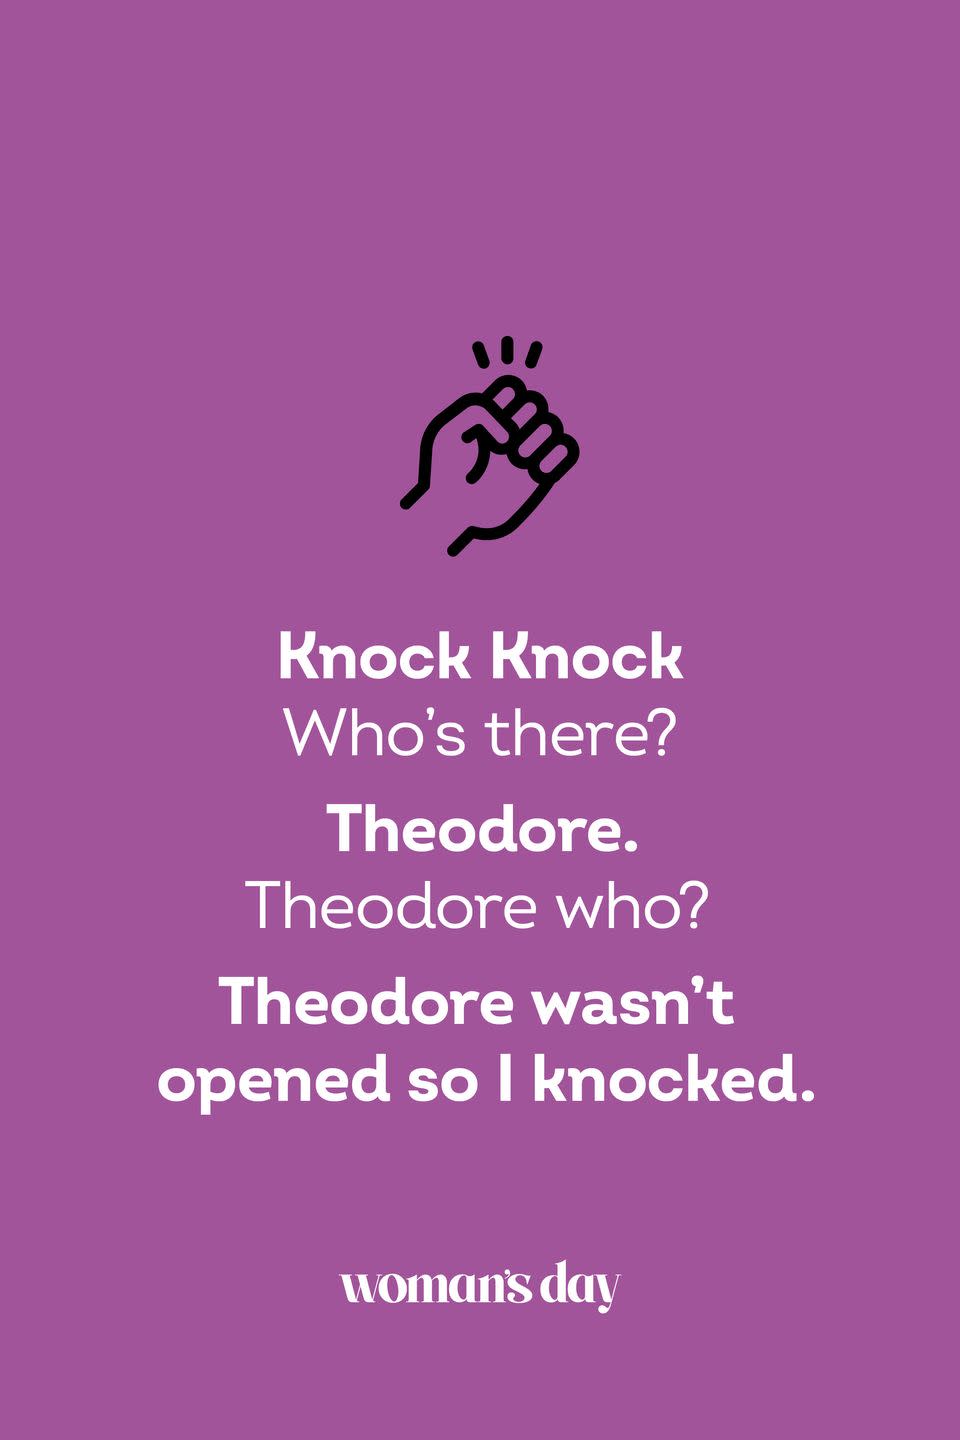 <p><strong>Knock Knock.</strong></p><p><em>Who’s there?</em></p><p><strong>Theodore.</strong></p><p><em>Theodore who?</em></p><p><strong>Theodore wasn’t opened so I knocked.</strong></p>